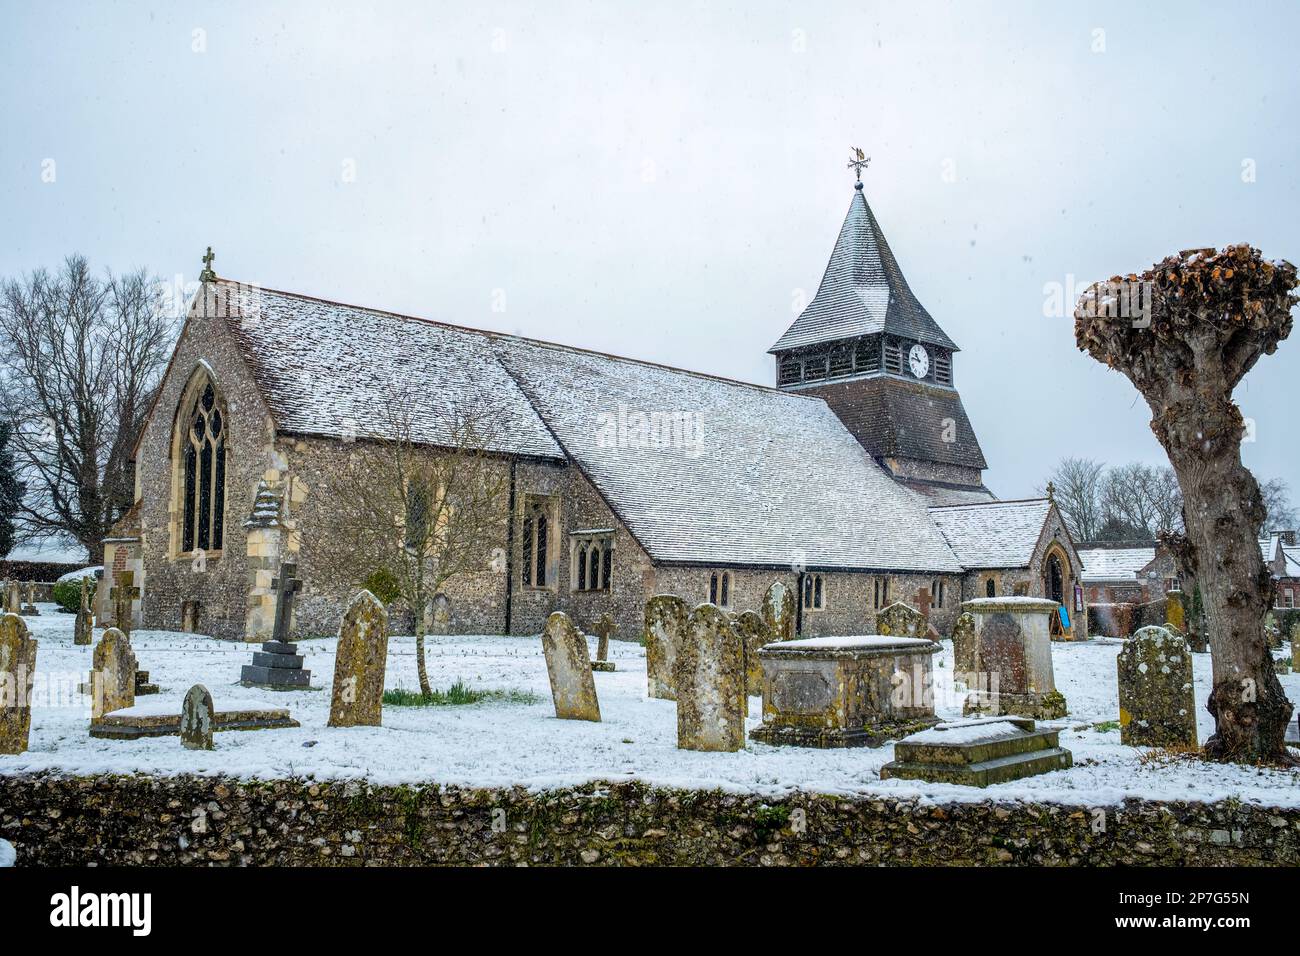 St Peter & St Paul. The parish church in Kings Somborne on a snowy day. Stock Photo